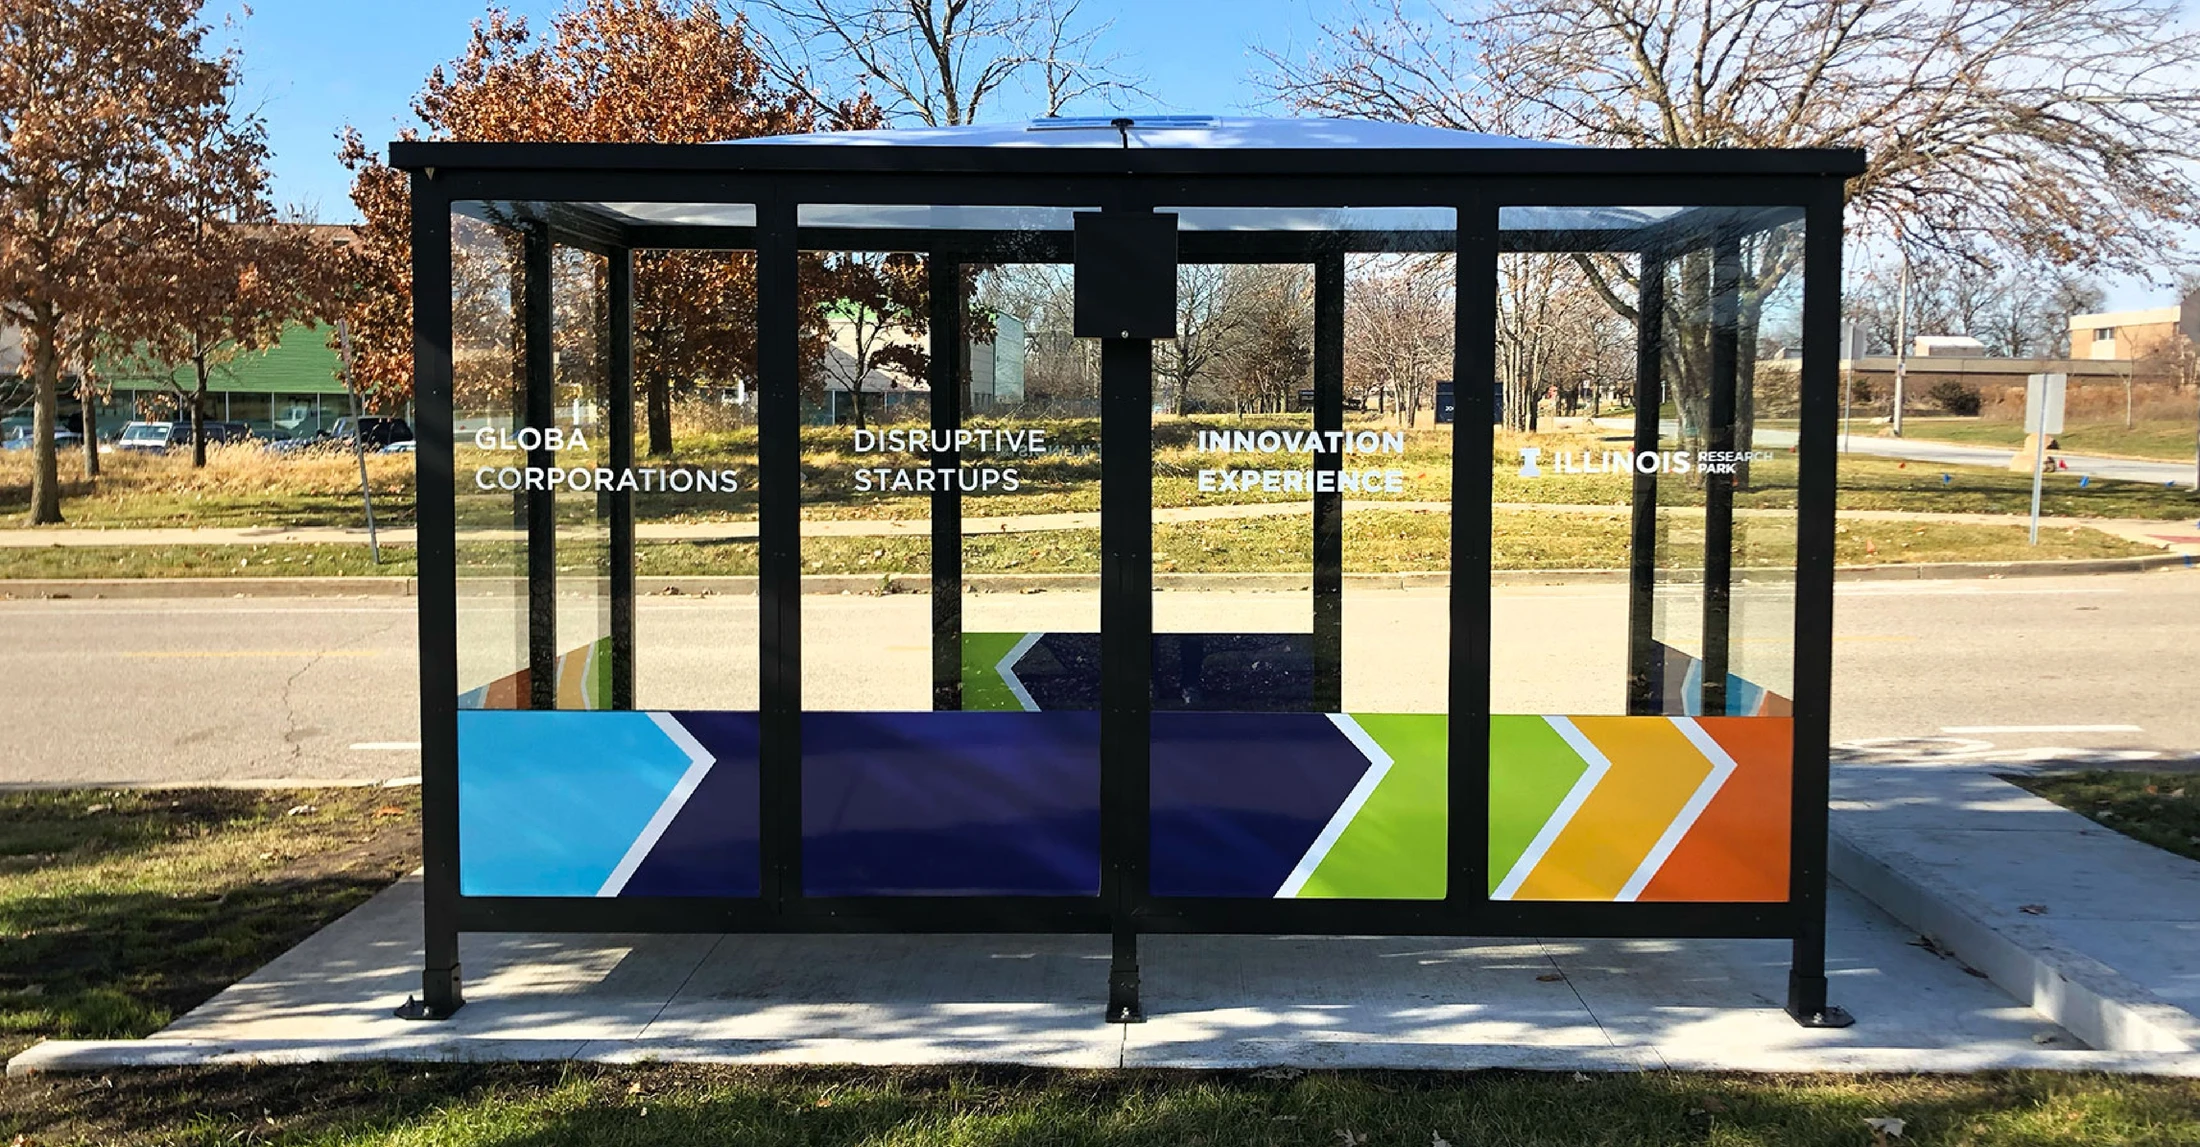 A bus stop with a colorful sign on it.